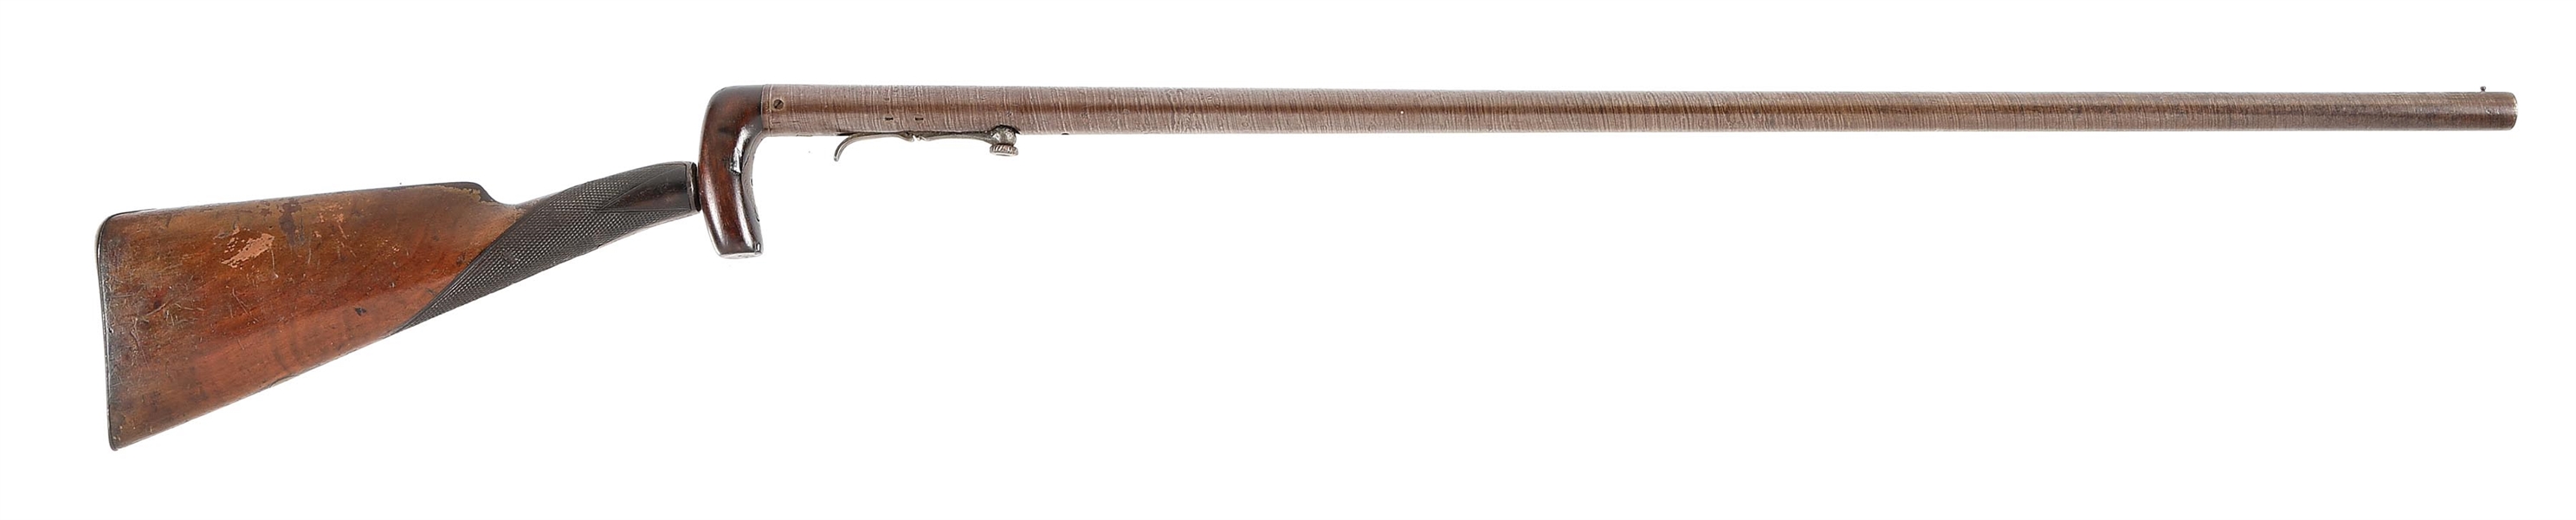 (A) ENGLISH UNDERHAMMER PERCUSSION CANE GUN WITH STOCK, MADE BY HUICKINSON.